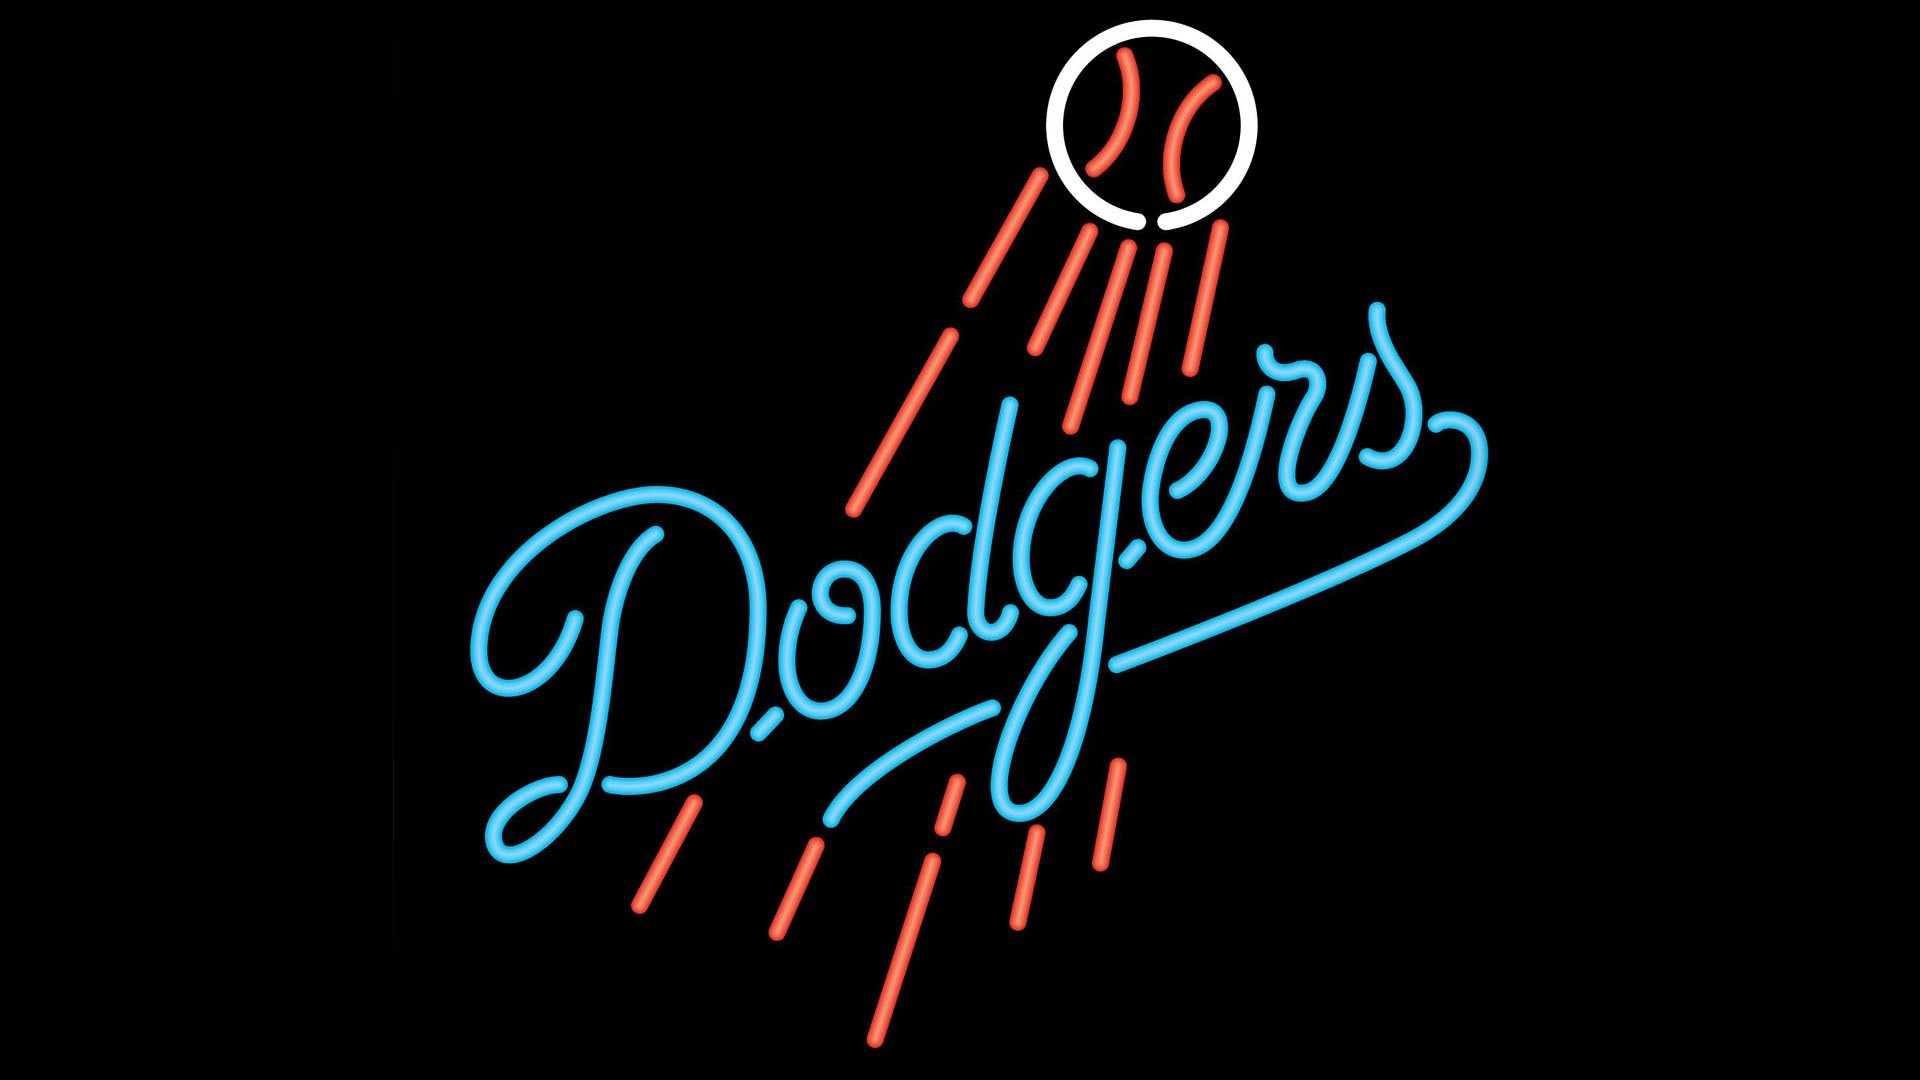 Los Angeles Dodgers MLB Wallpaper For Mac with high-resolution 1920x1080 pixel. You can use this wallpaper for Mac Desktop Wallpaper, Laptop Screensavers, Android Wallpapers, Tablet or iPhone Home Screen and another mobile phone device